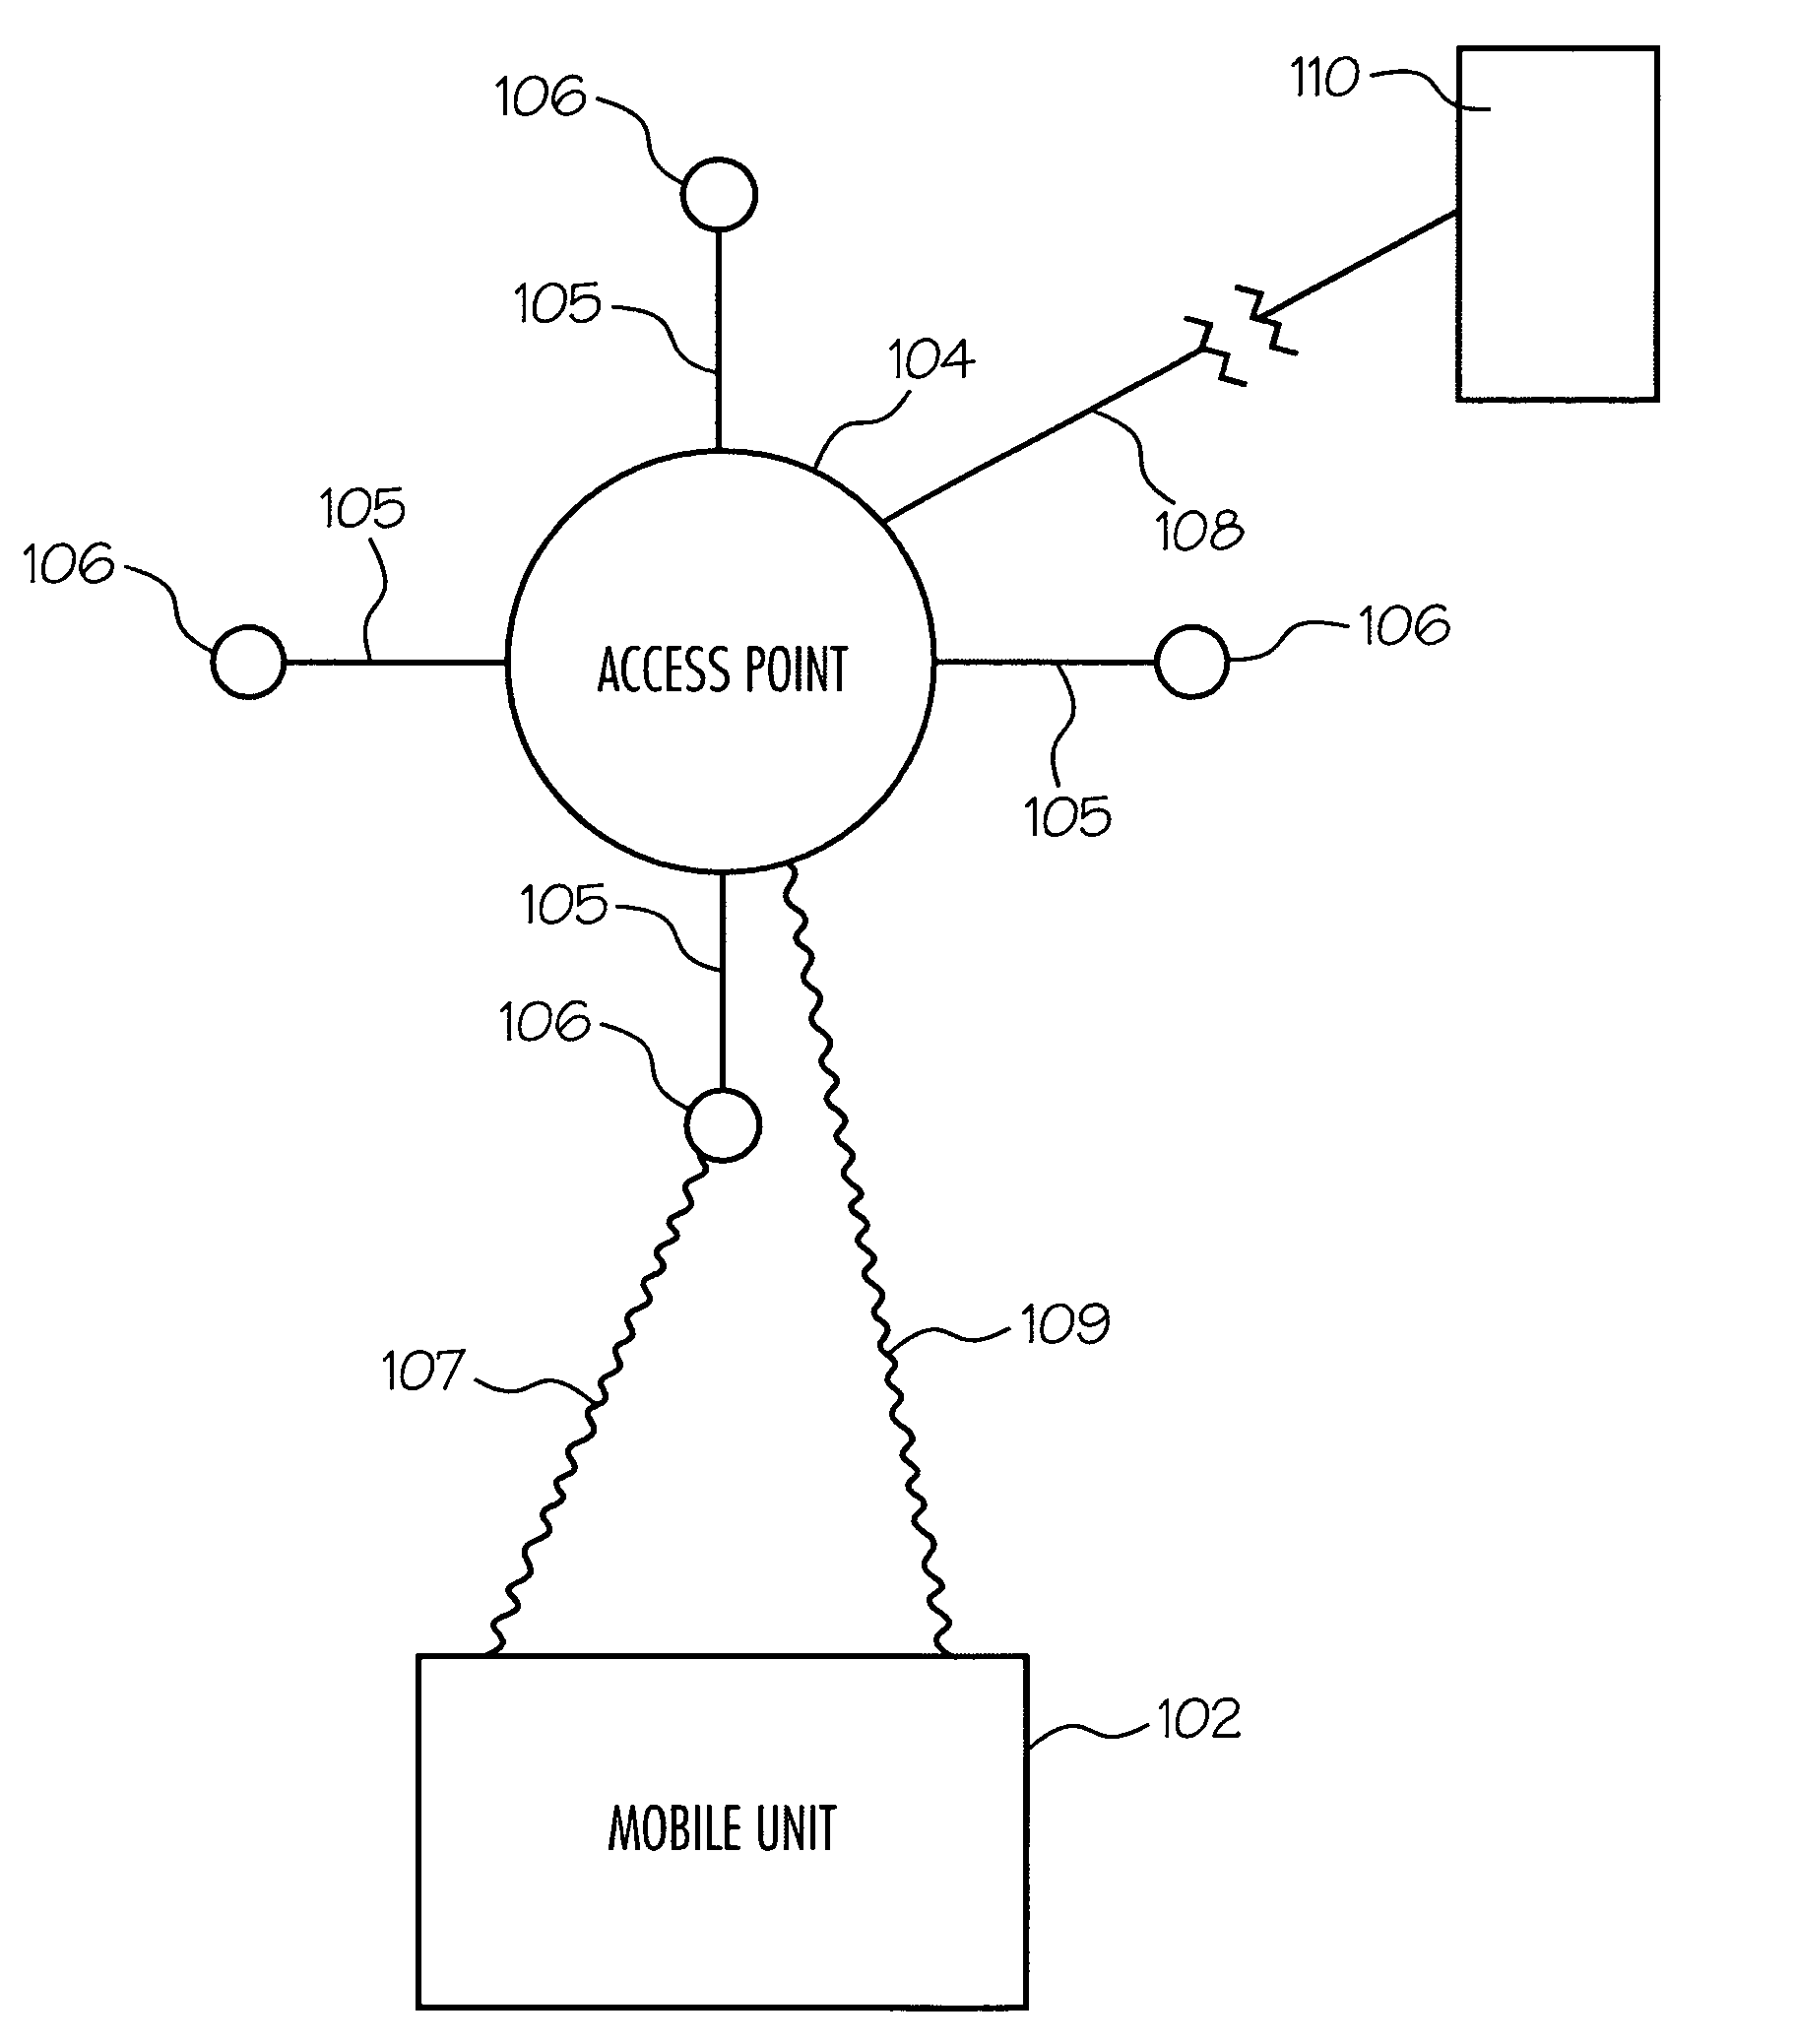 Method and system for communicating data to a wireless access point